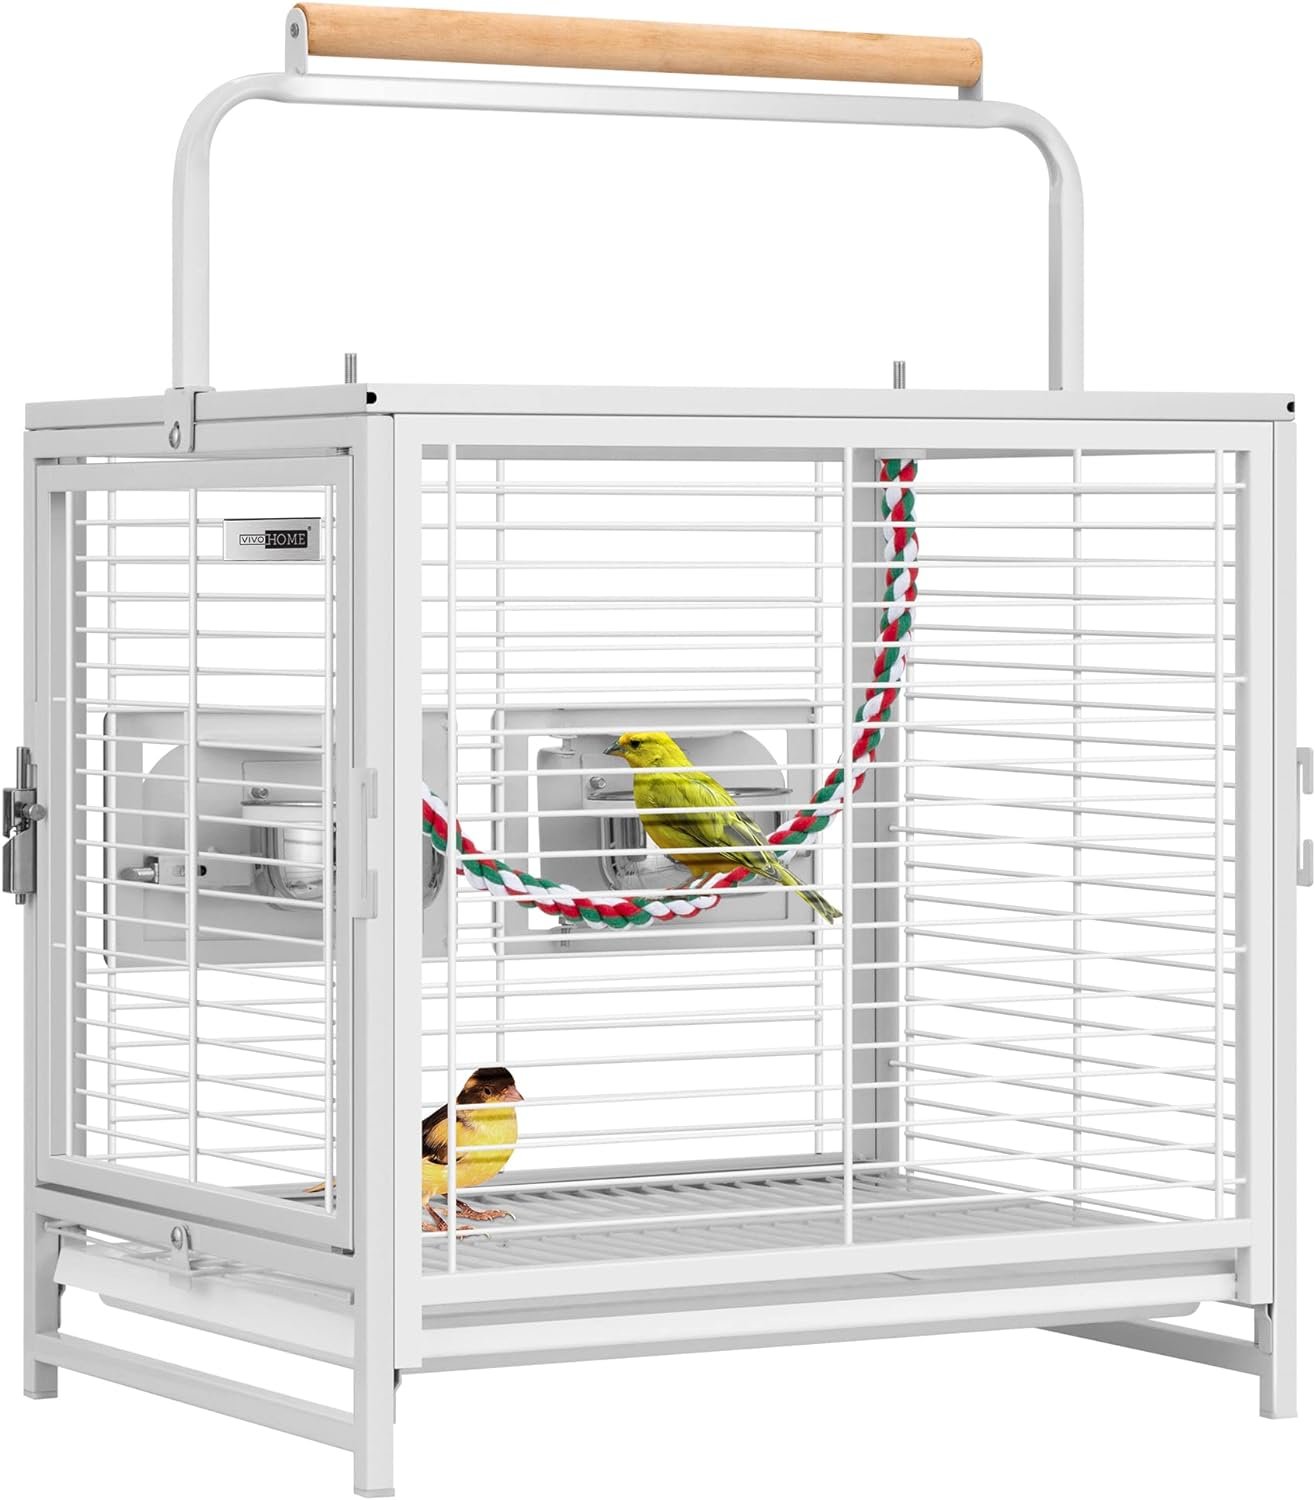 VIVOHOME 19 Inch Wrought Iron Bird Travel Carrier Cage for Parrots Conures Lovebird Cockatiel Parakeets White